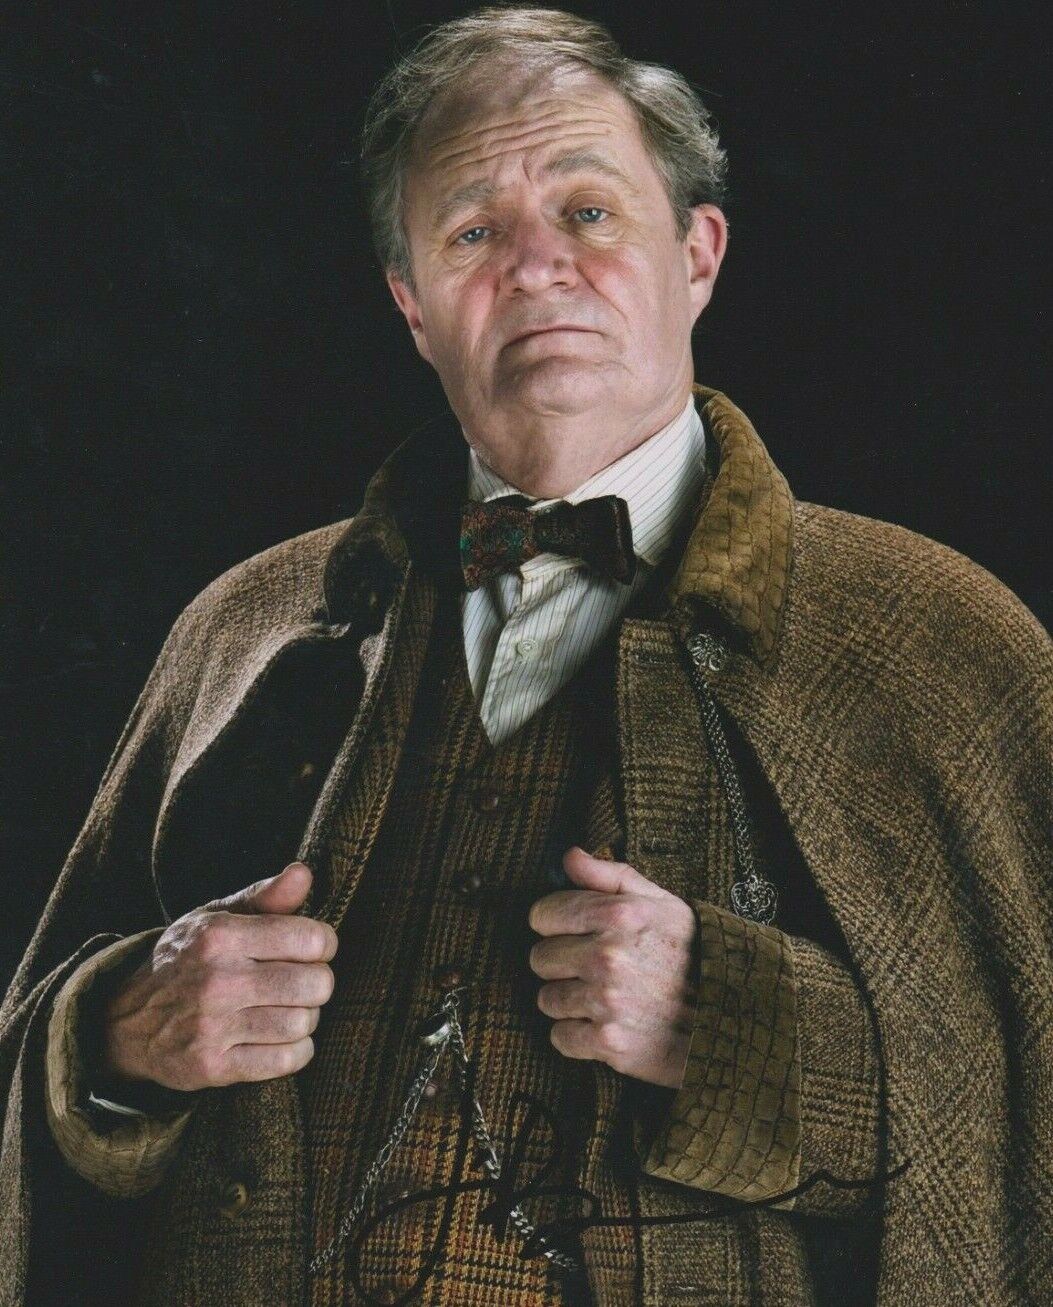 Jim Broadbent **HAND SIGNED** 10x8 Photo Poster painting ~ AUTOGRAPHED ~ Harry Potter